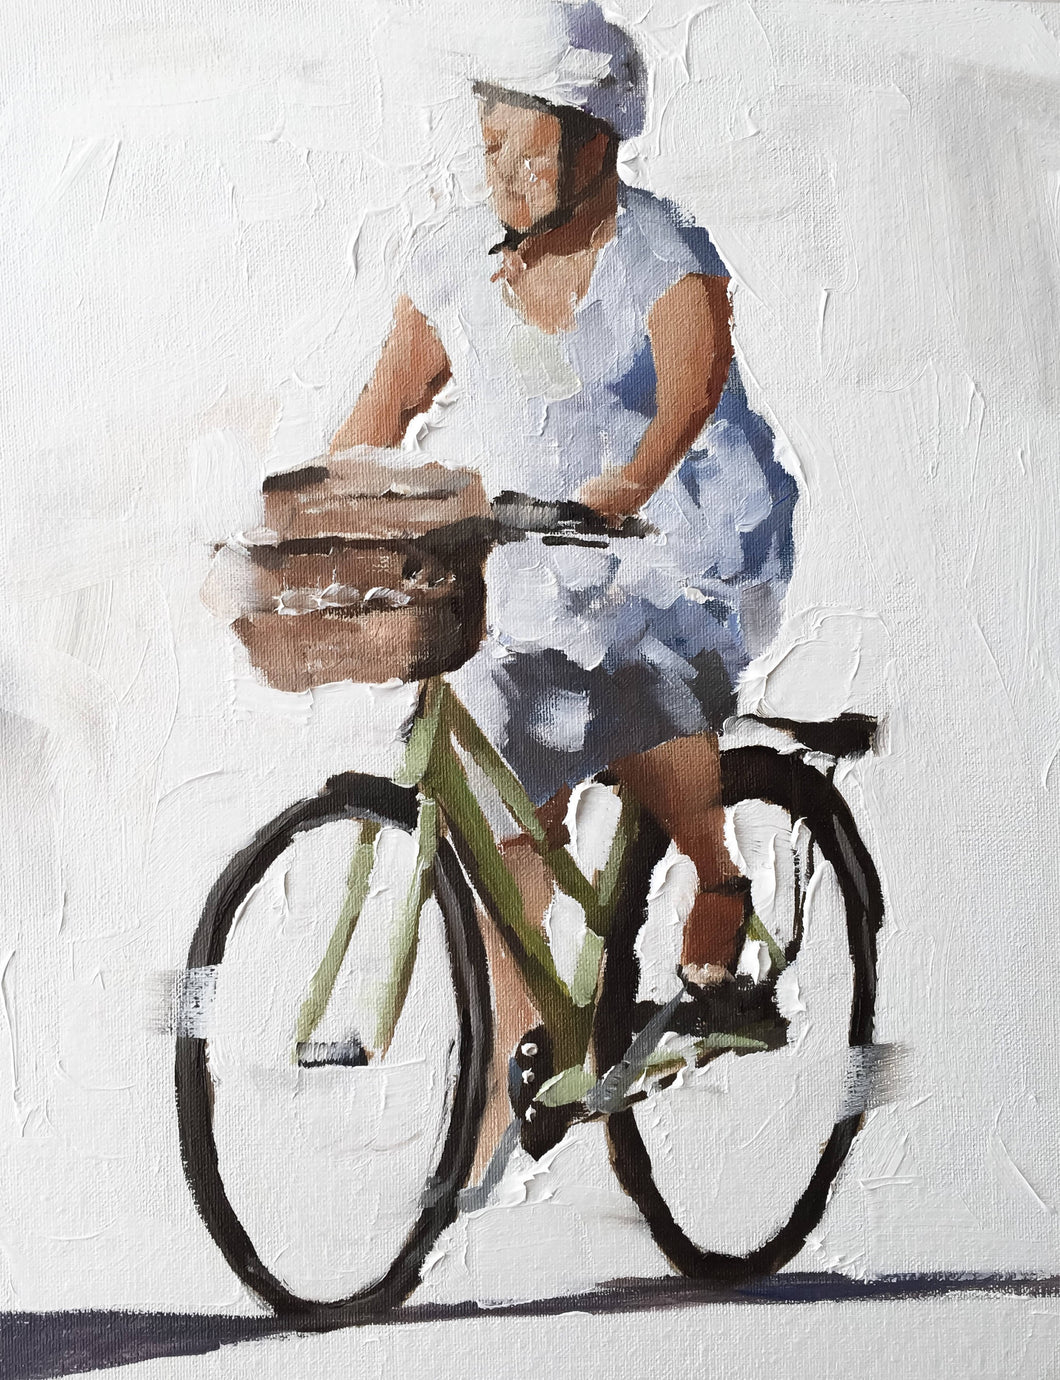 Man on bike -Bicycle Painting - Cycling art - Cycling Poster - Cycling Print - Fine Art - from original oil painting by James Coates